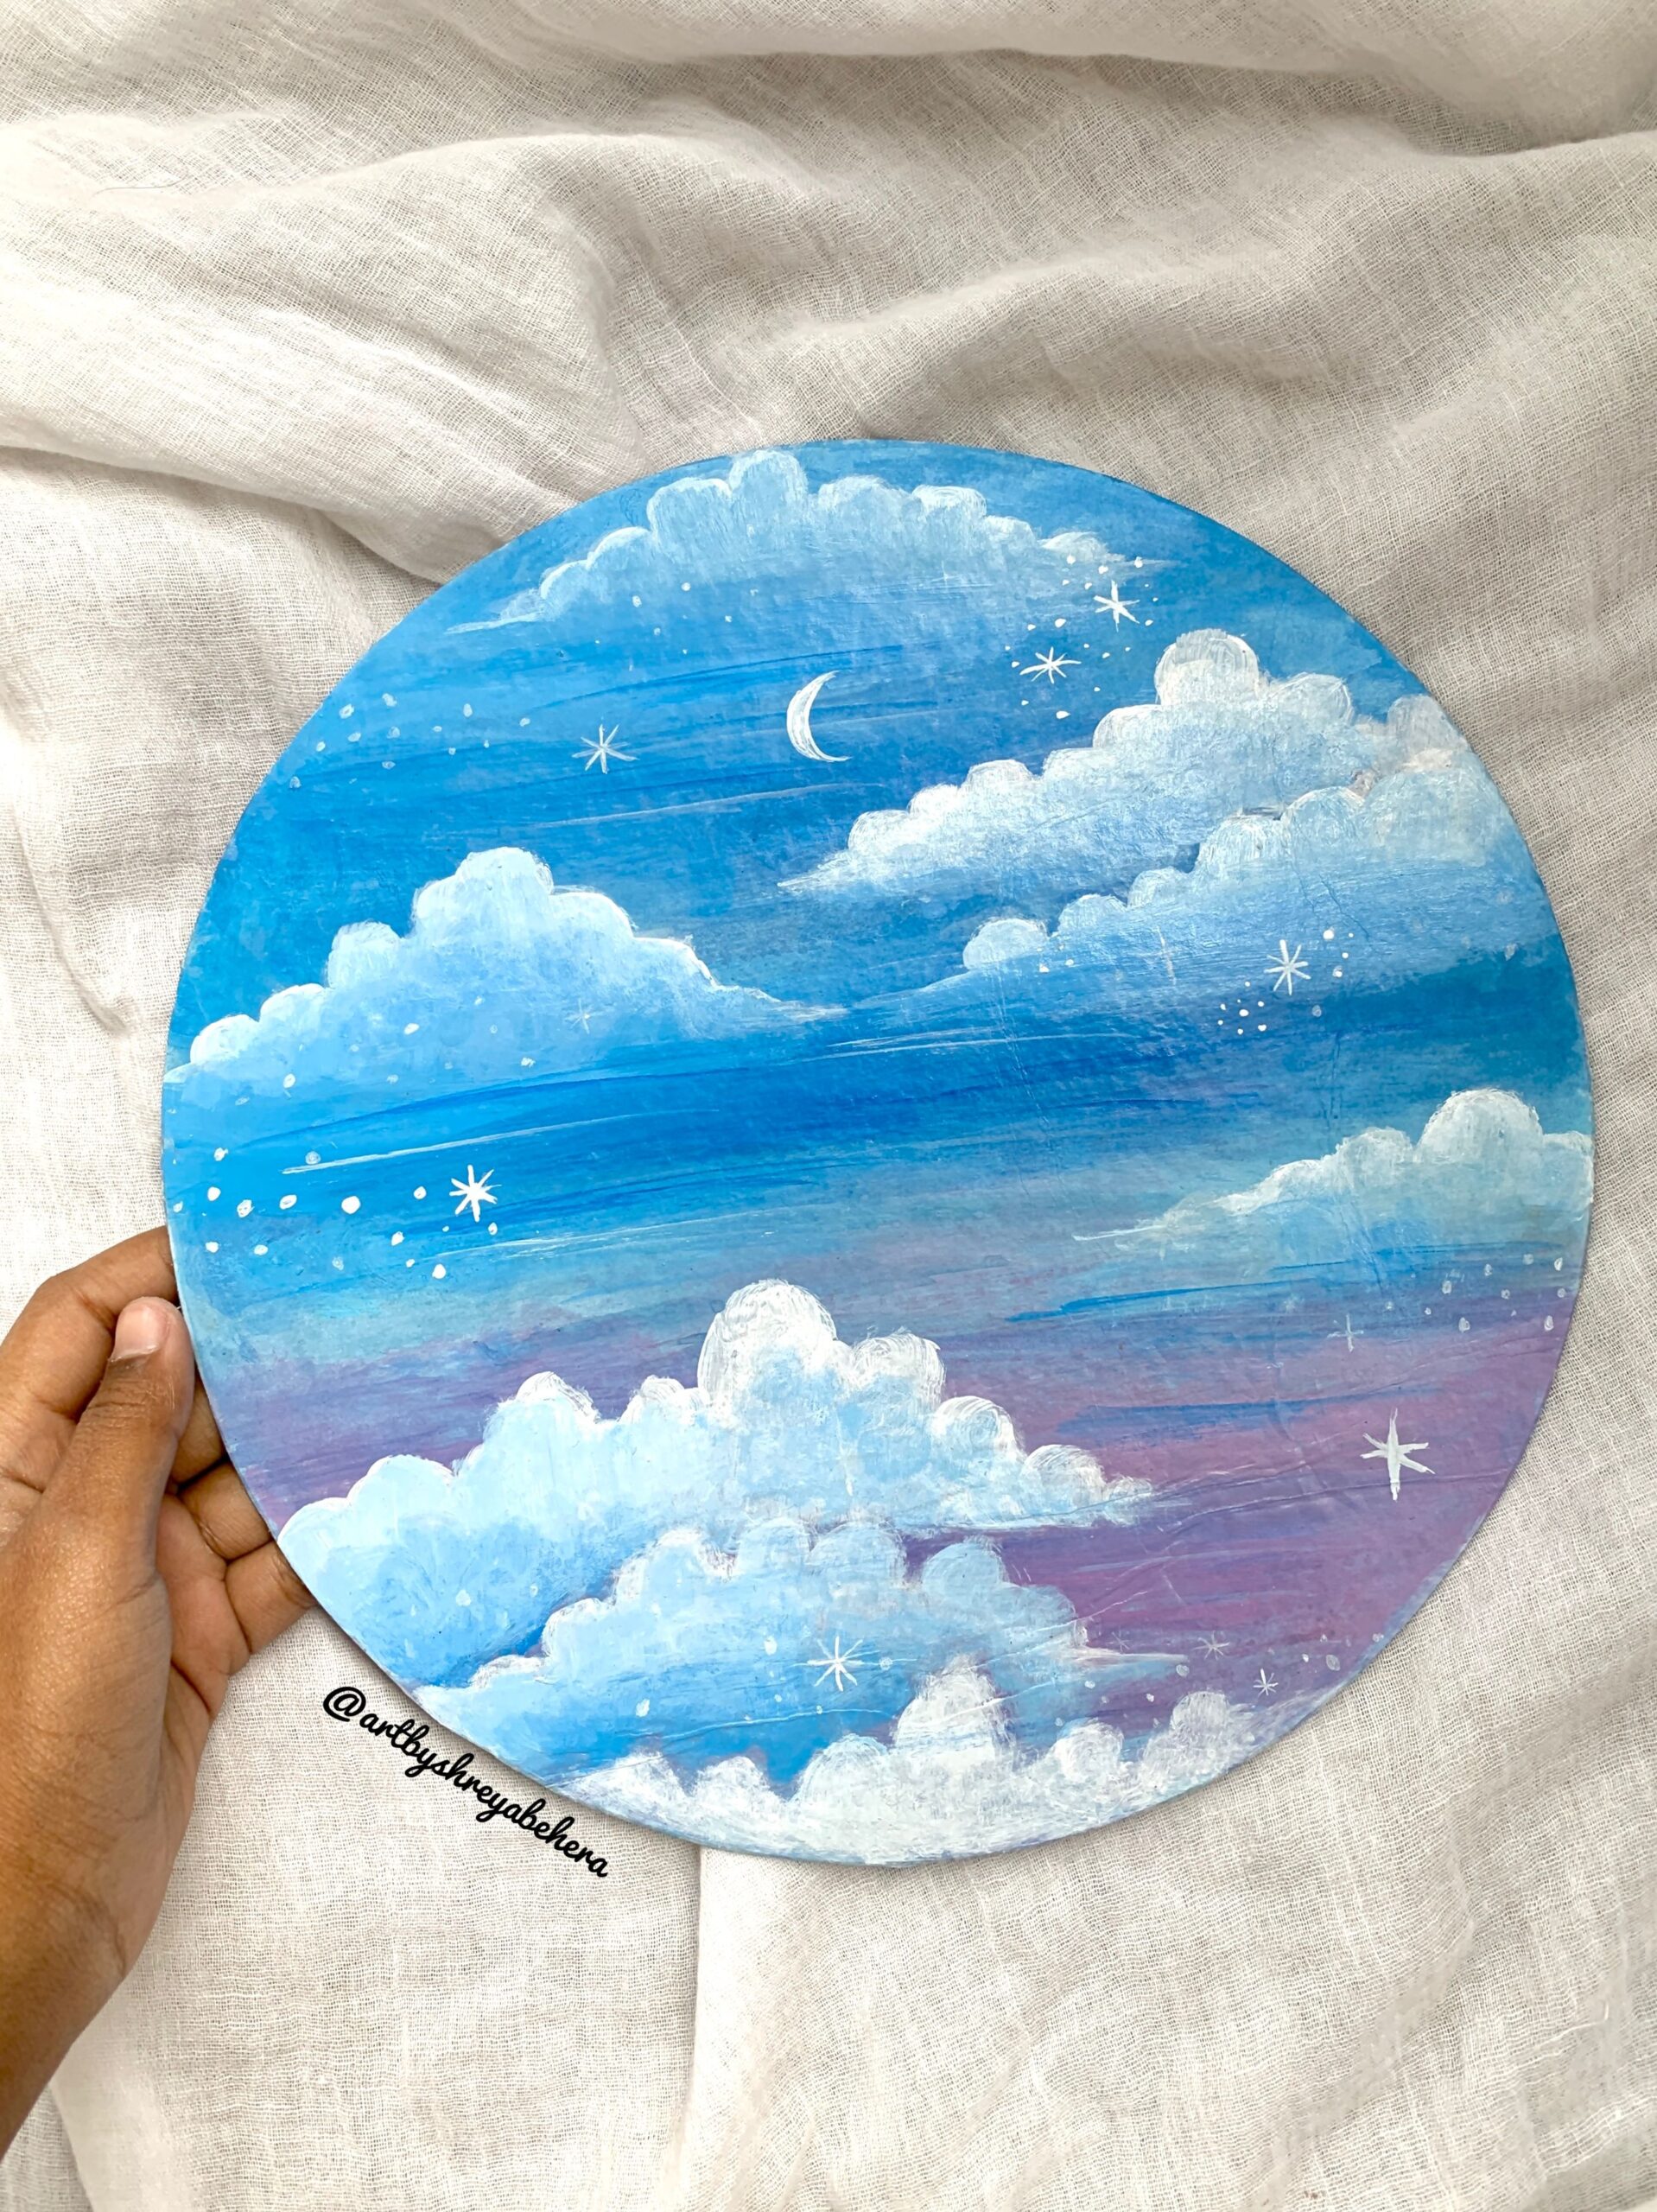 Aesthetic Painting Ideas On Canvas | Watercolor moon, Aesthetic painting, Painting art projects